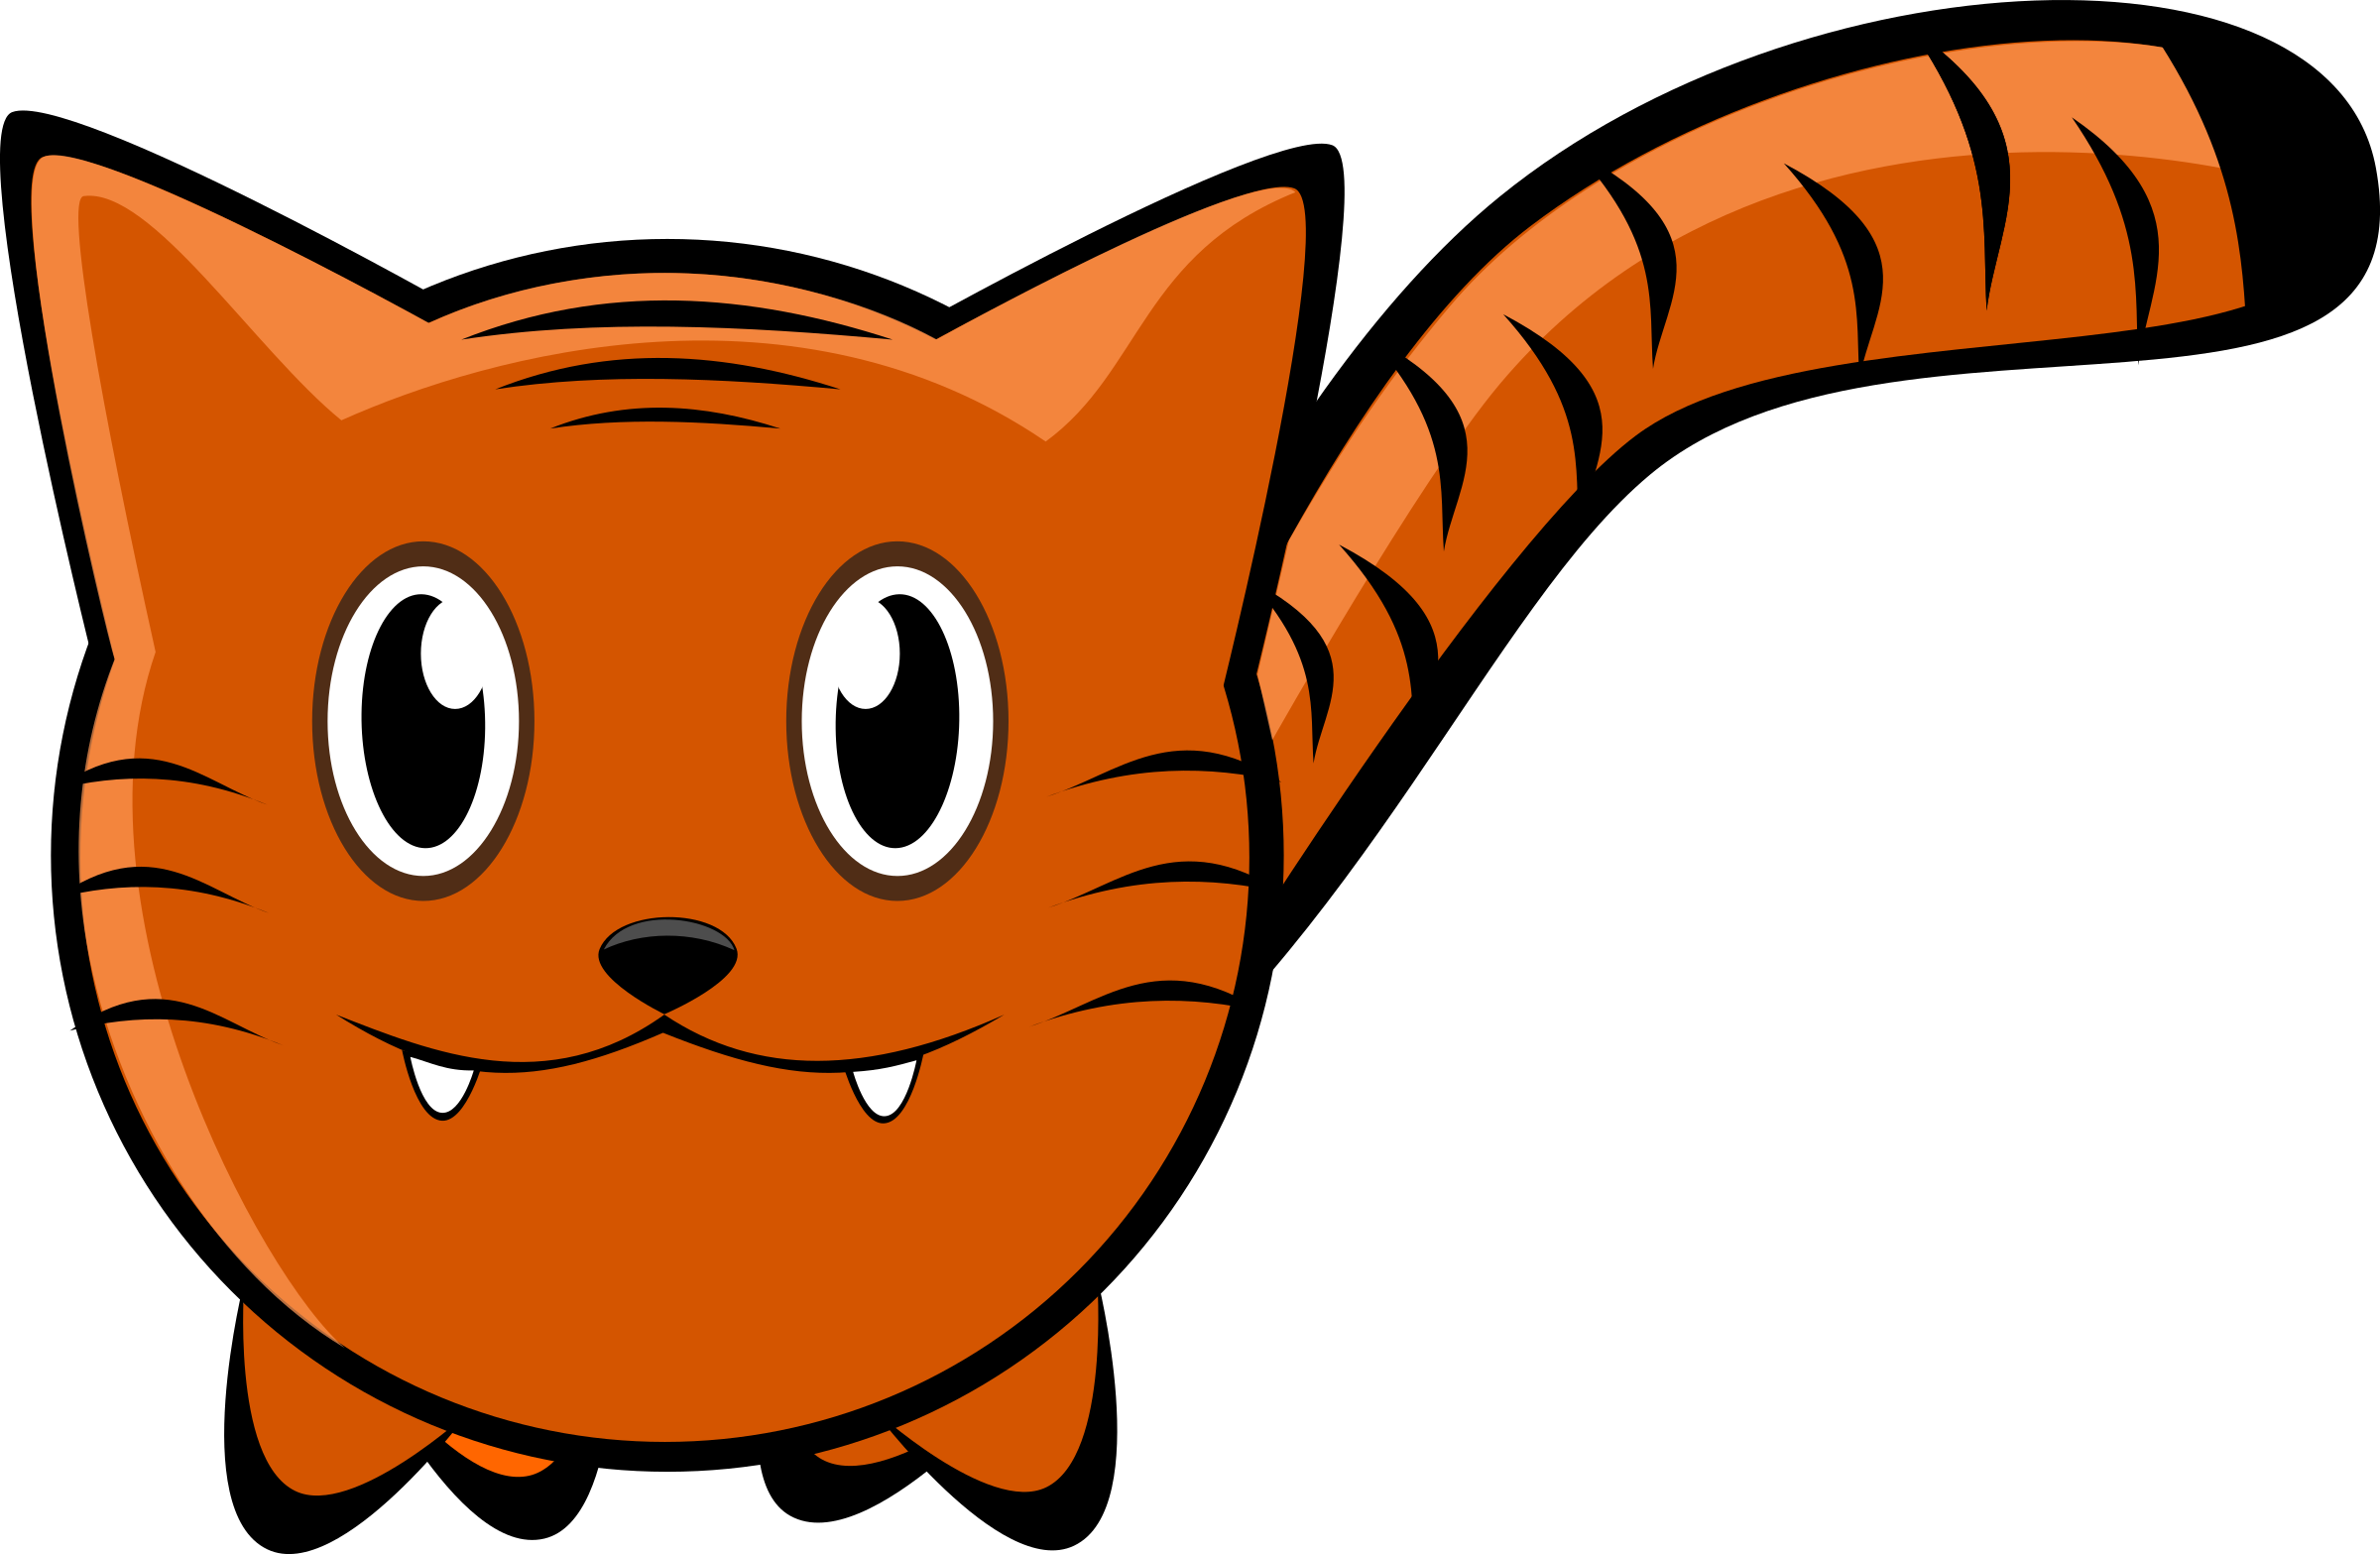 Download Cartoon Tiger Vector Clipart image - Free stock photo ...